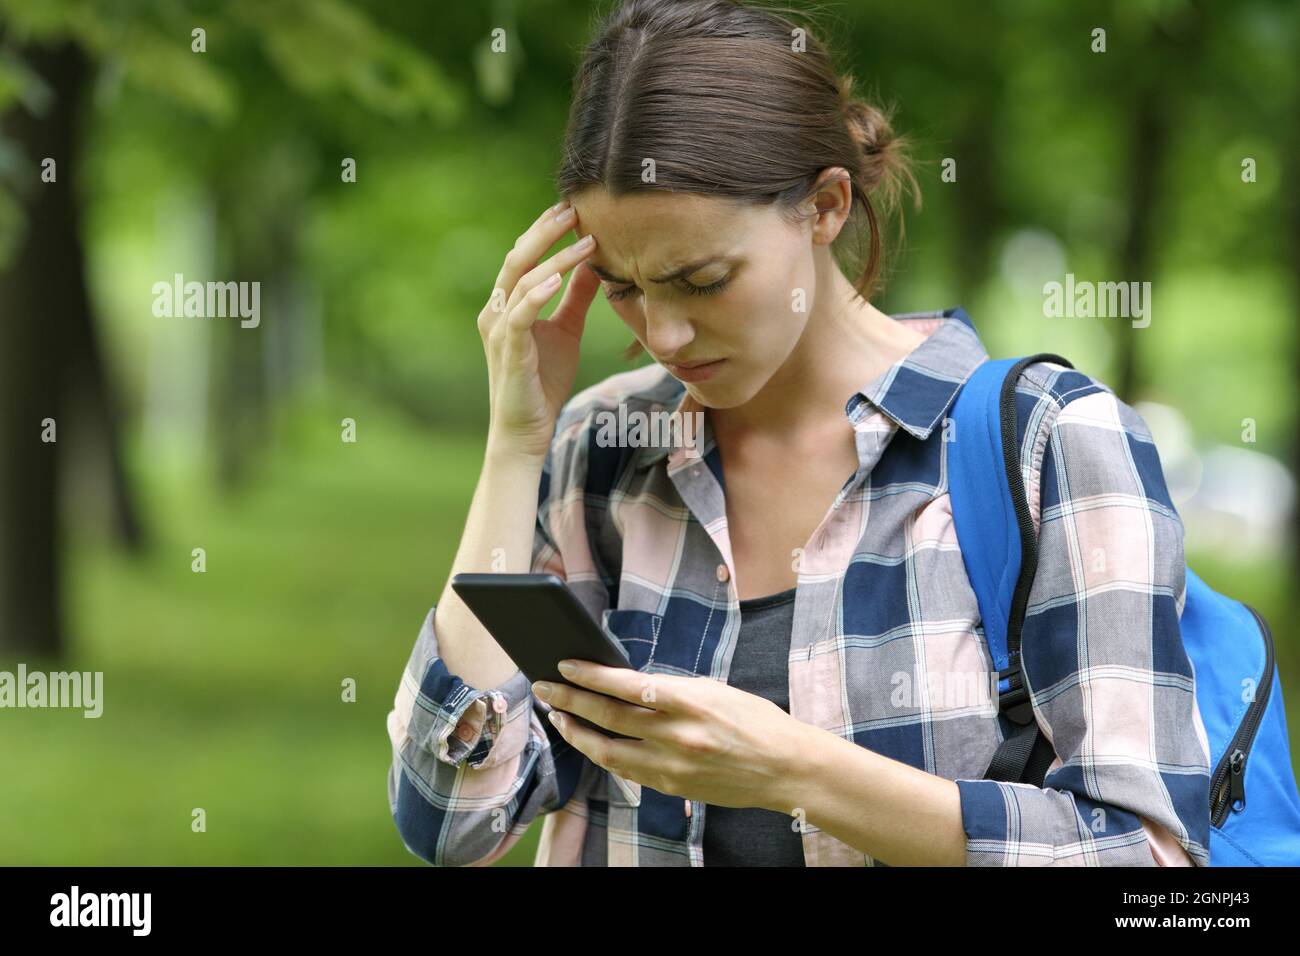 Concerned student checking smart phone in a park Stock Photo